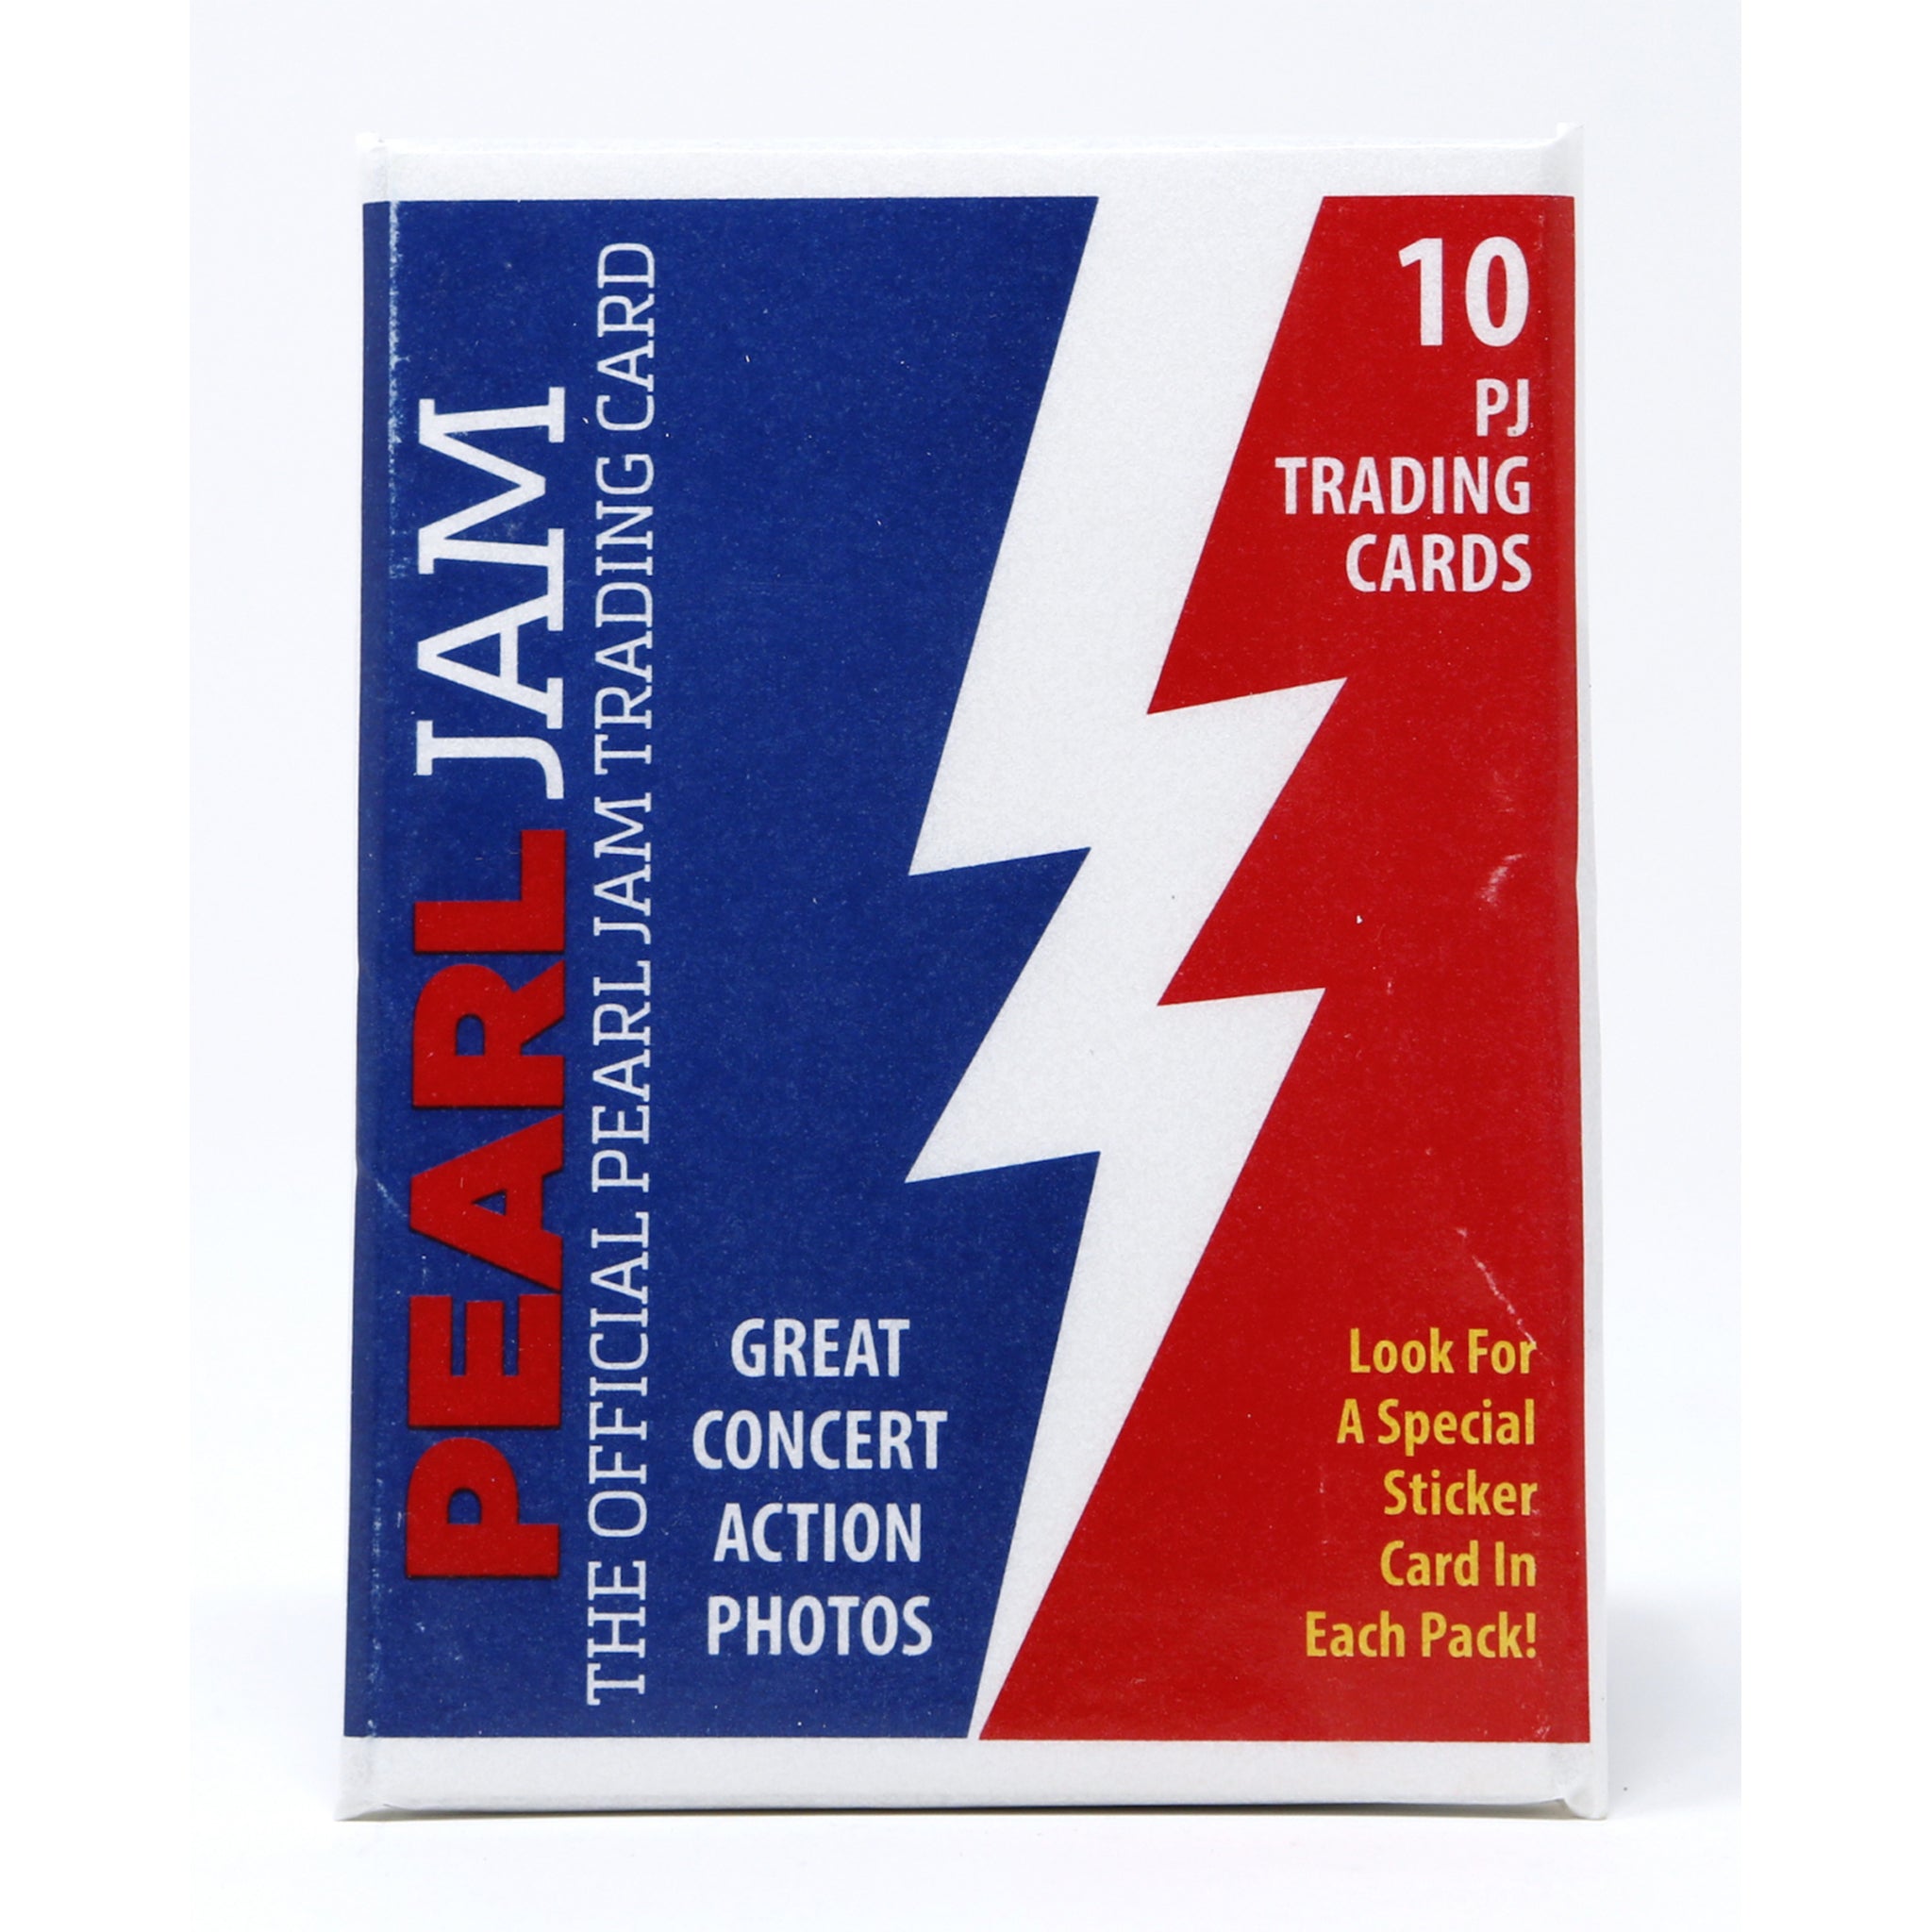 2018 PEARL JAM CHICAGO AWAY SHOWS TRADING CARDS PACK